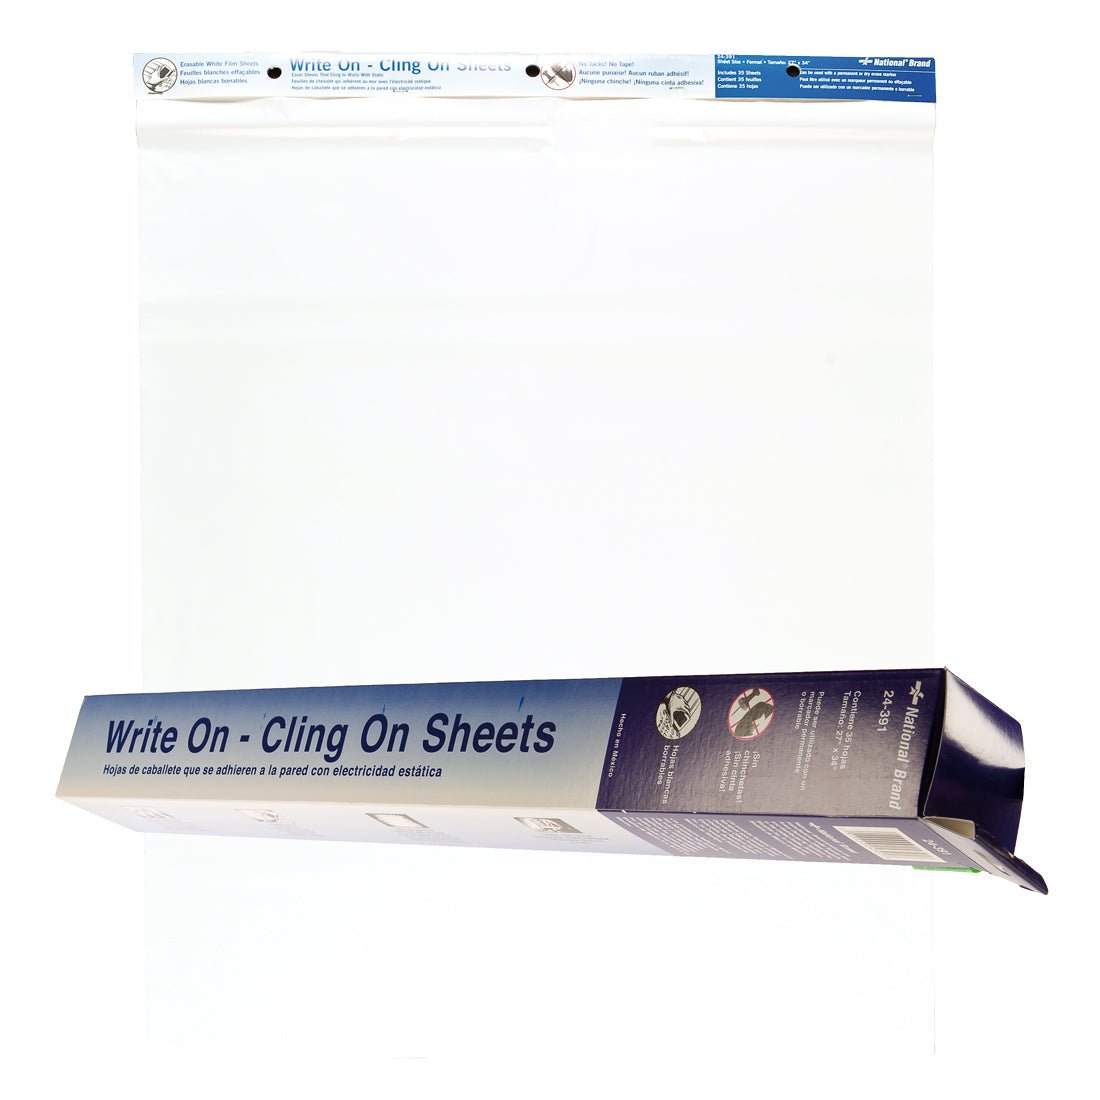 "Write on-Cling on" Sheets